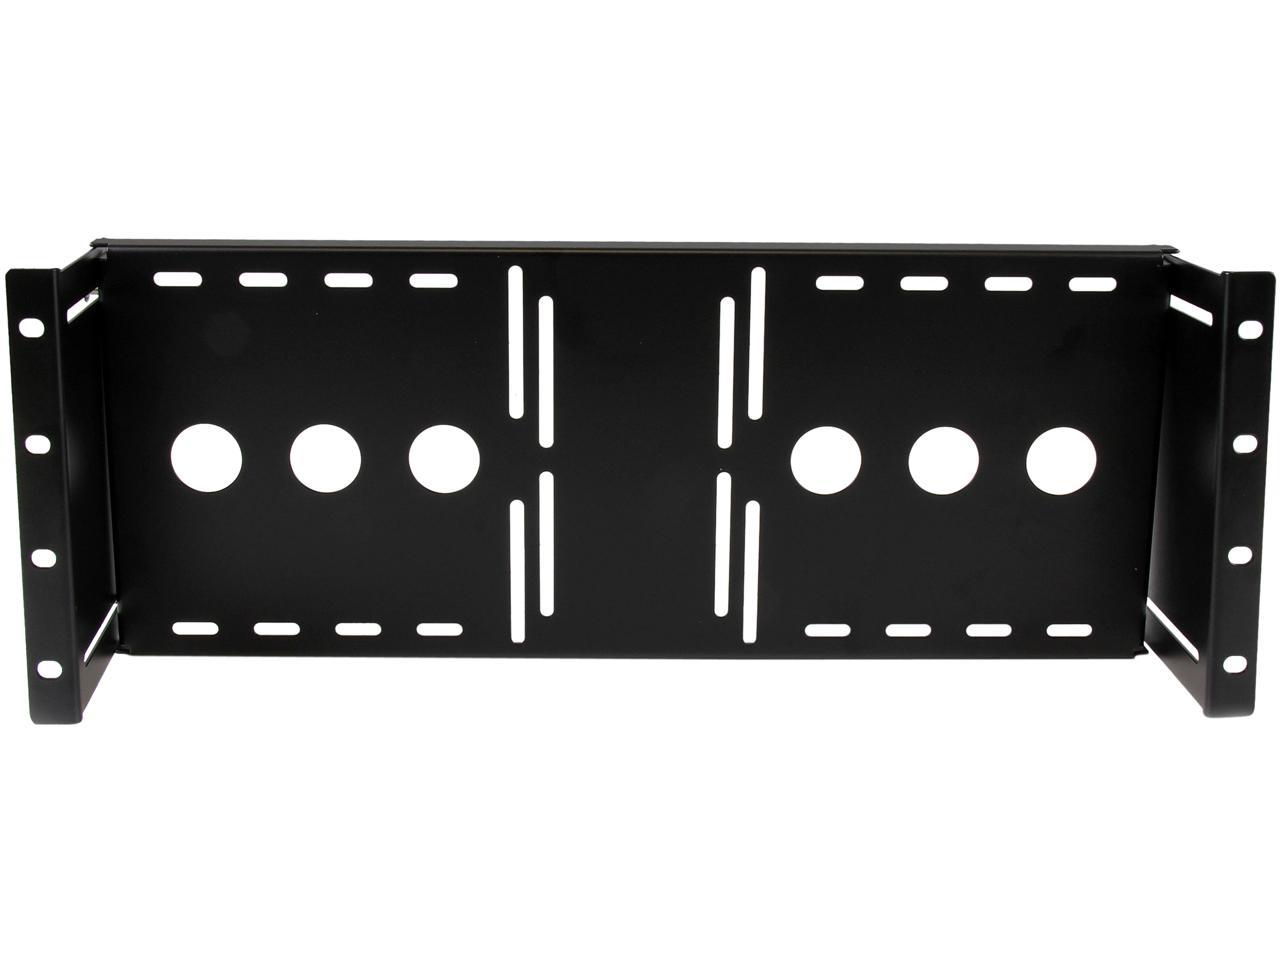 StarTech.com 4U Universal VESA LCD Monitor Mounting Bracket for 19-inch Rack or Cabinet - TAA Compliant - Cold-Pressed Steel Bracket - image 1 of 7